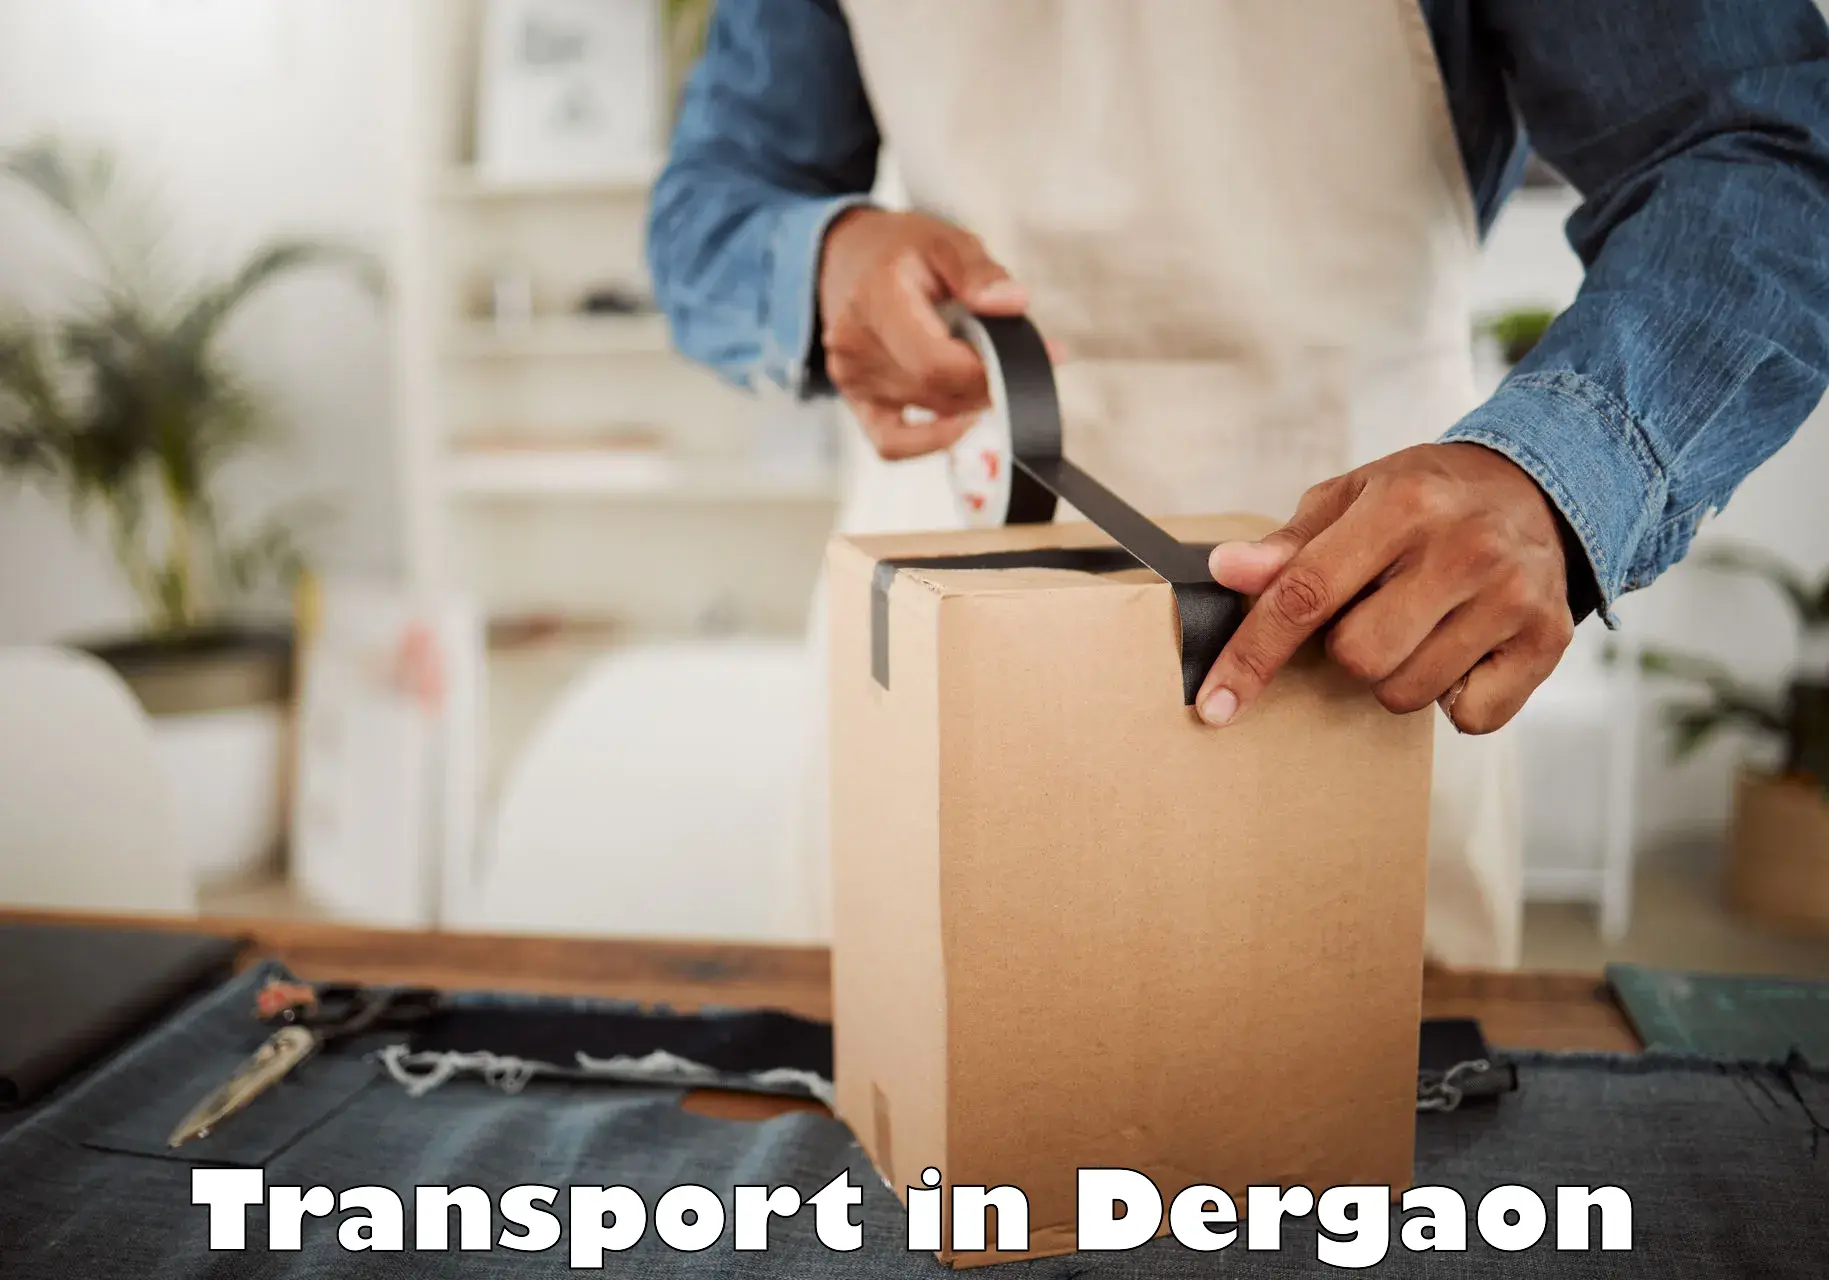 Vehicle courier services in Dergaon